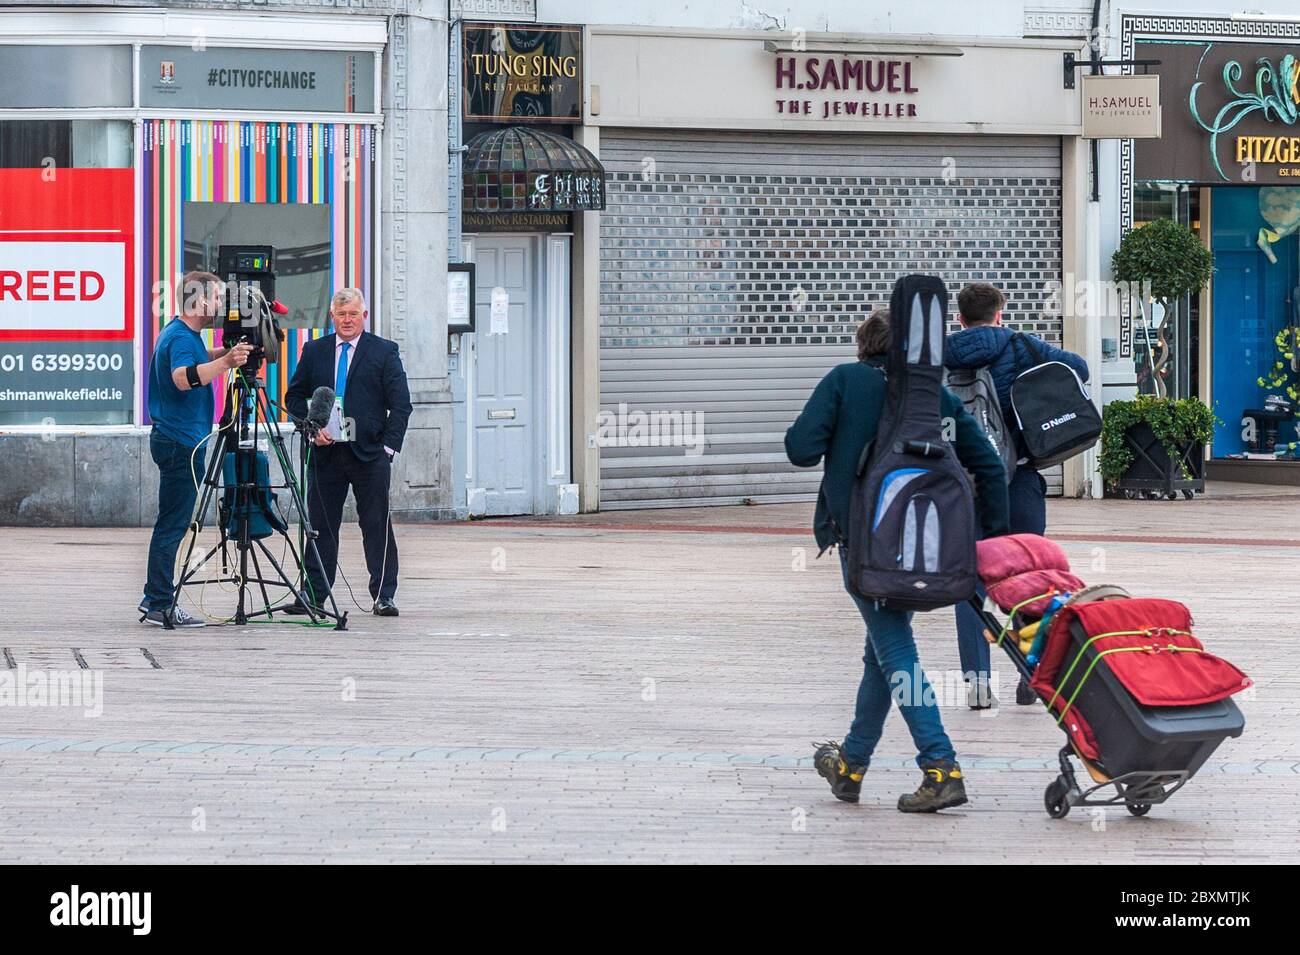 Cork, Ireland. 8th June, 2020. Many shops in Ireland are re-opening today after a 3 month closure due to the Covid-19 pandemic. Paul Byrne of Virgin Media News was reporting from Patrick Street, Cork, on the re-opening. Credit: AG News/Alamy Live News Stock Photo